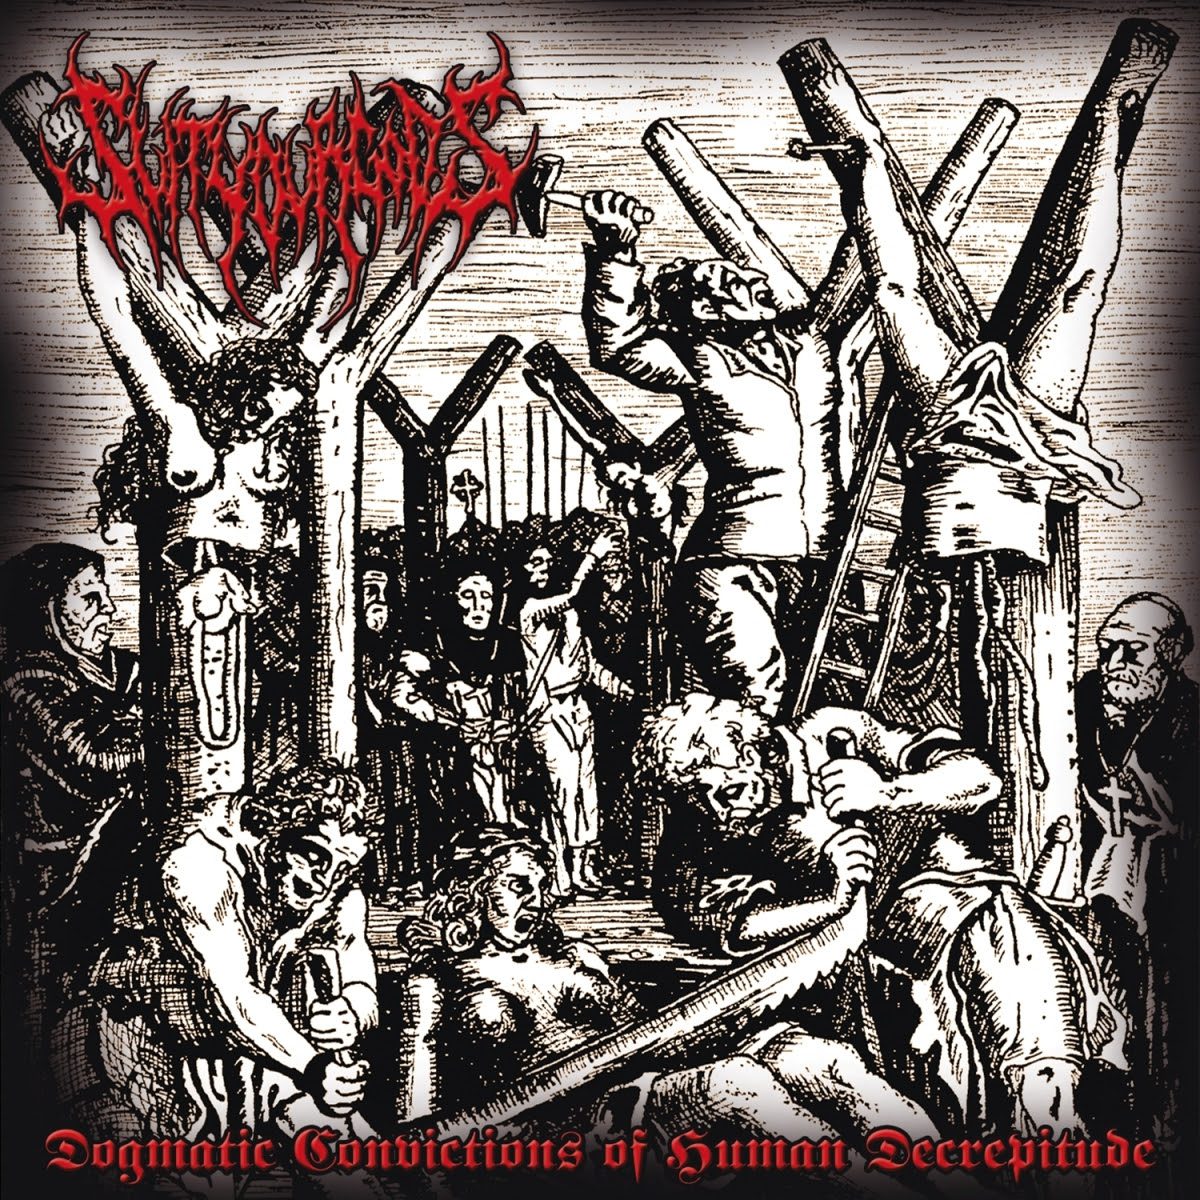 SLIT YOUR GODS – Dogmatic convictions of human decrepitude